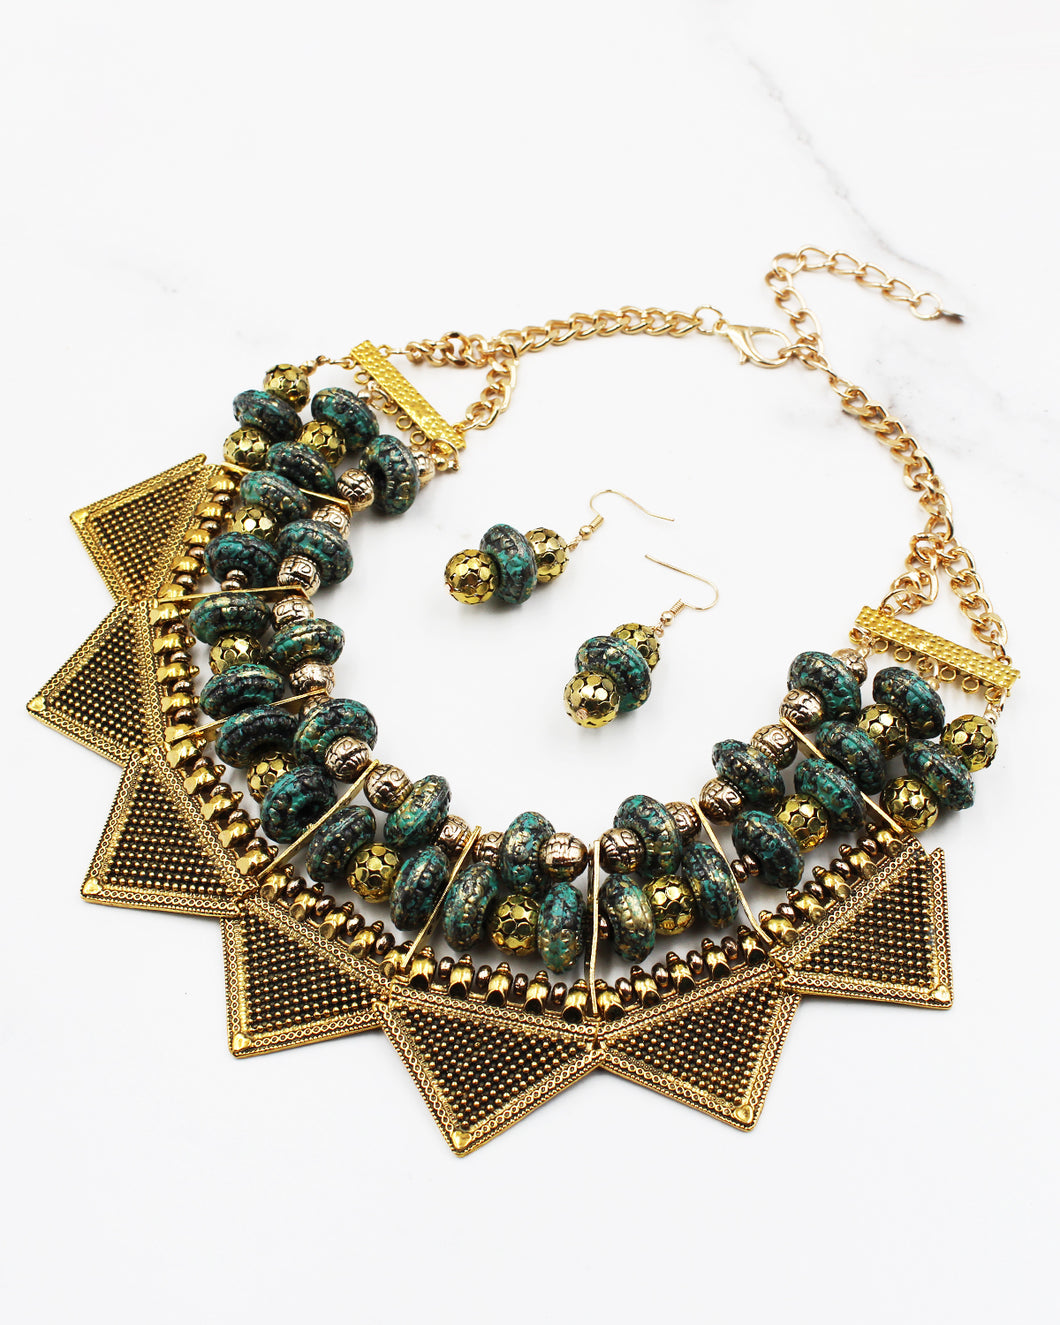 Patina Beaded Bib Necklace with Antique Gold Metal